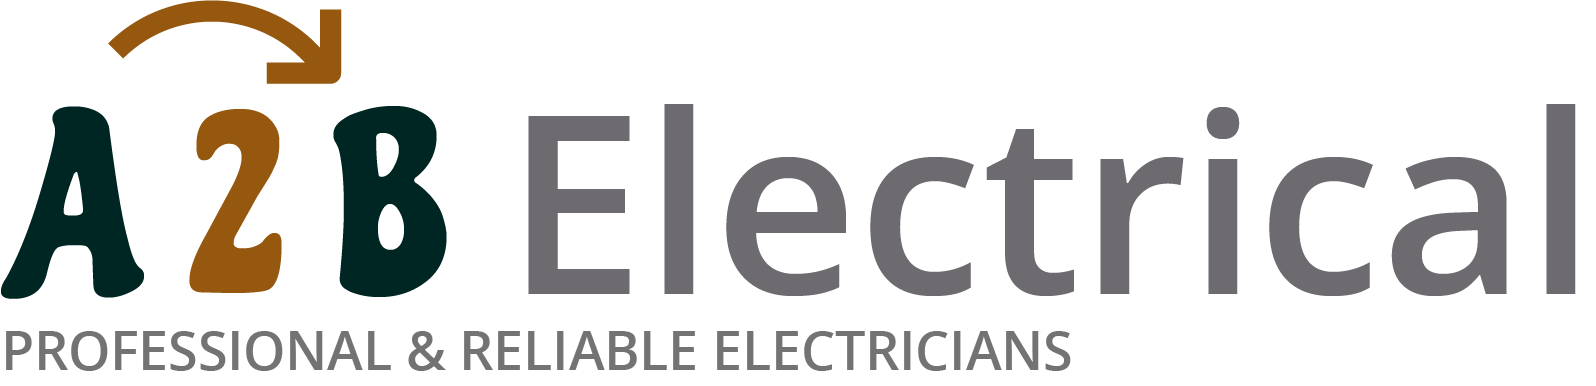 If you have electrical wiring problems in Danbury, we can provide an electrician to have a look for you. 